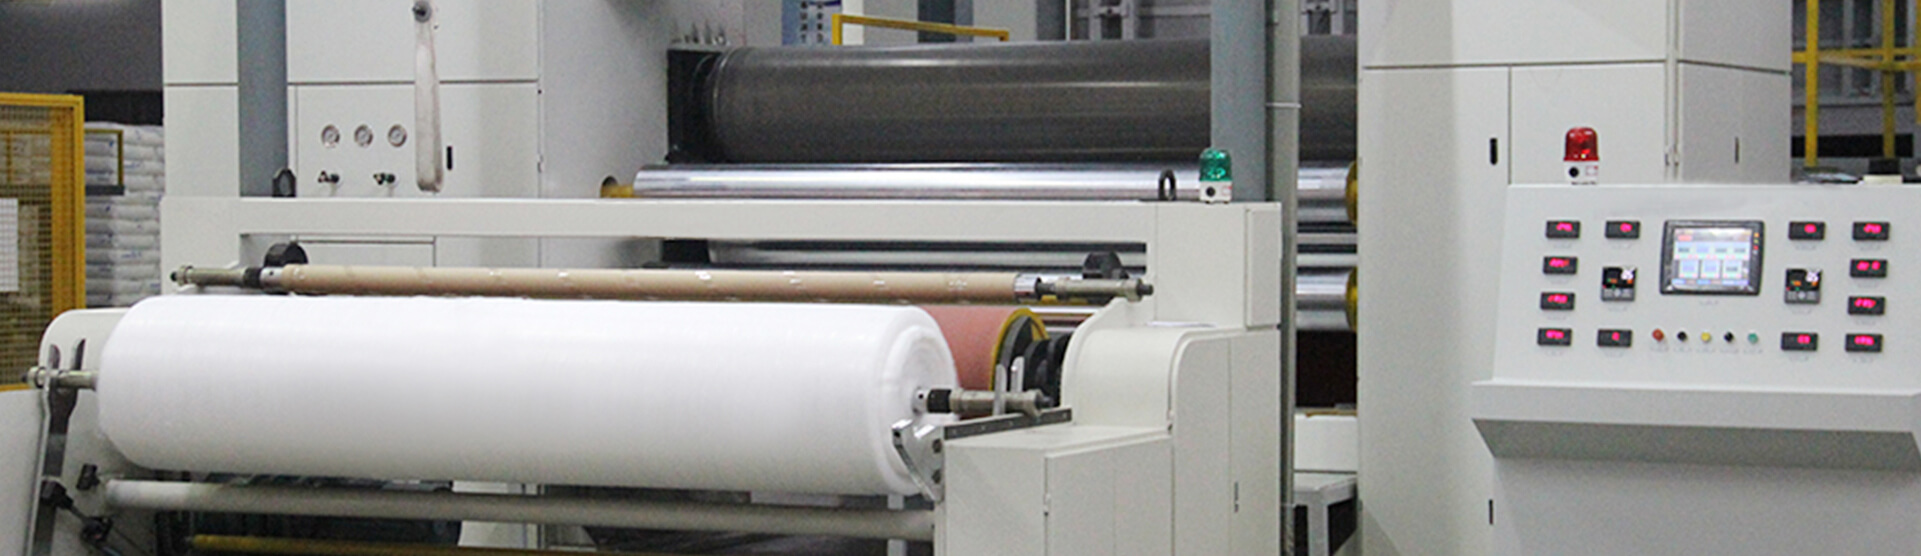 Nonwoven Fabric Production System